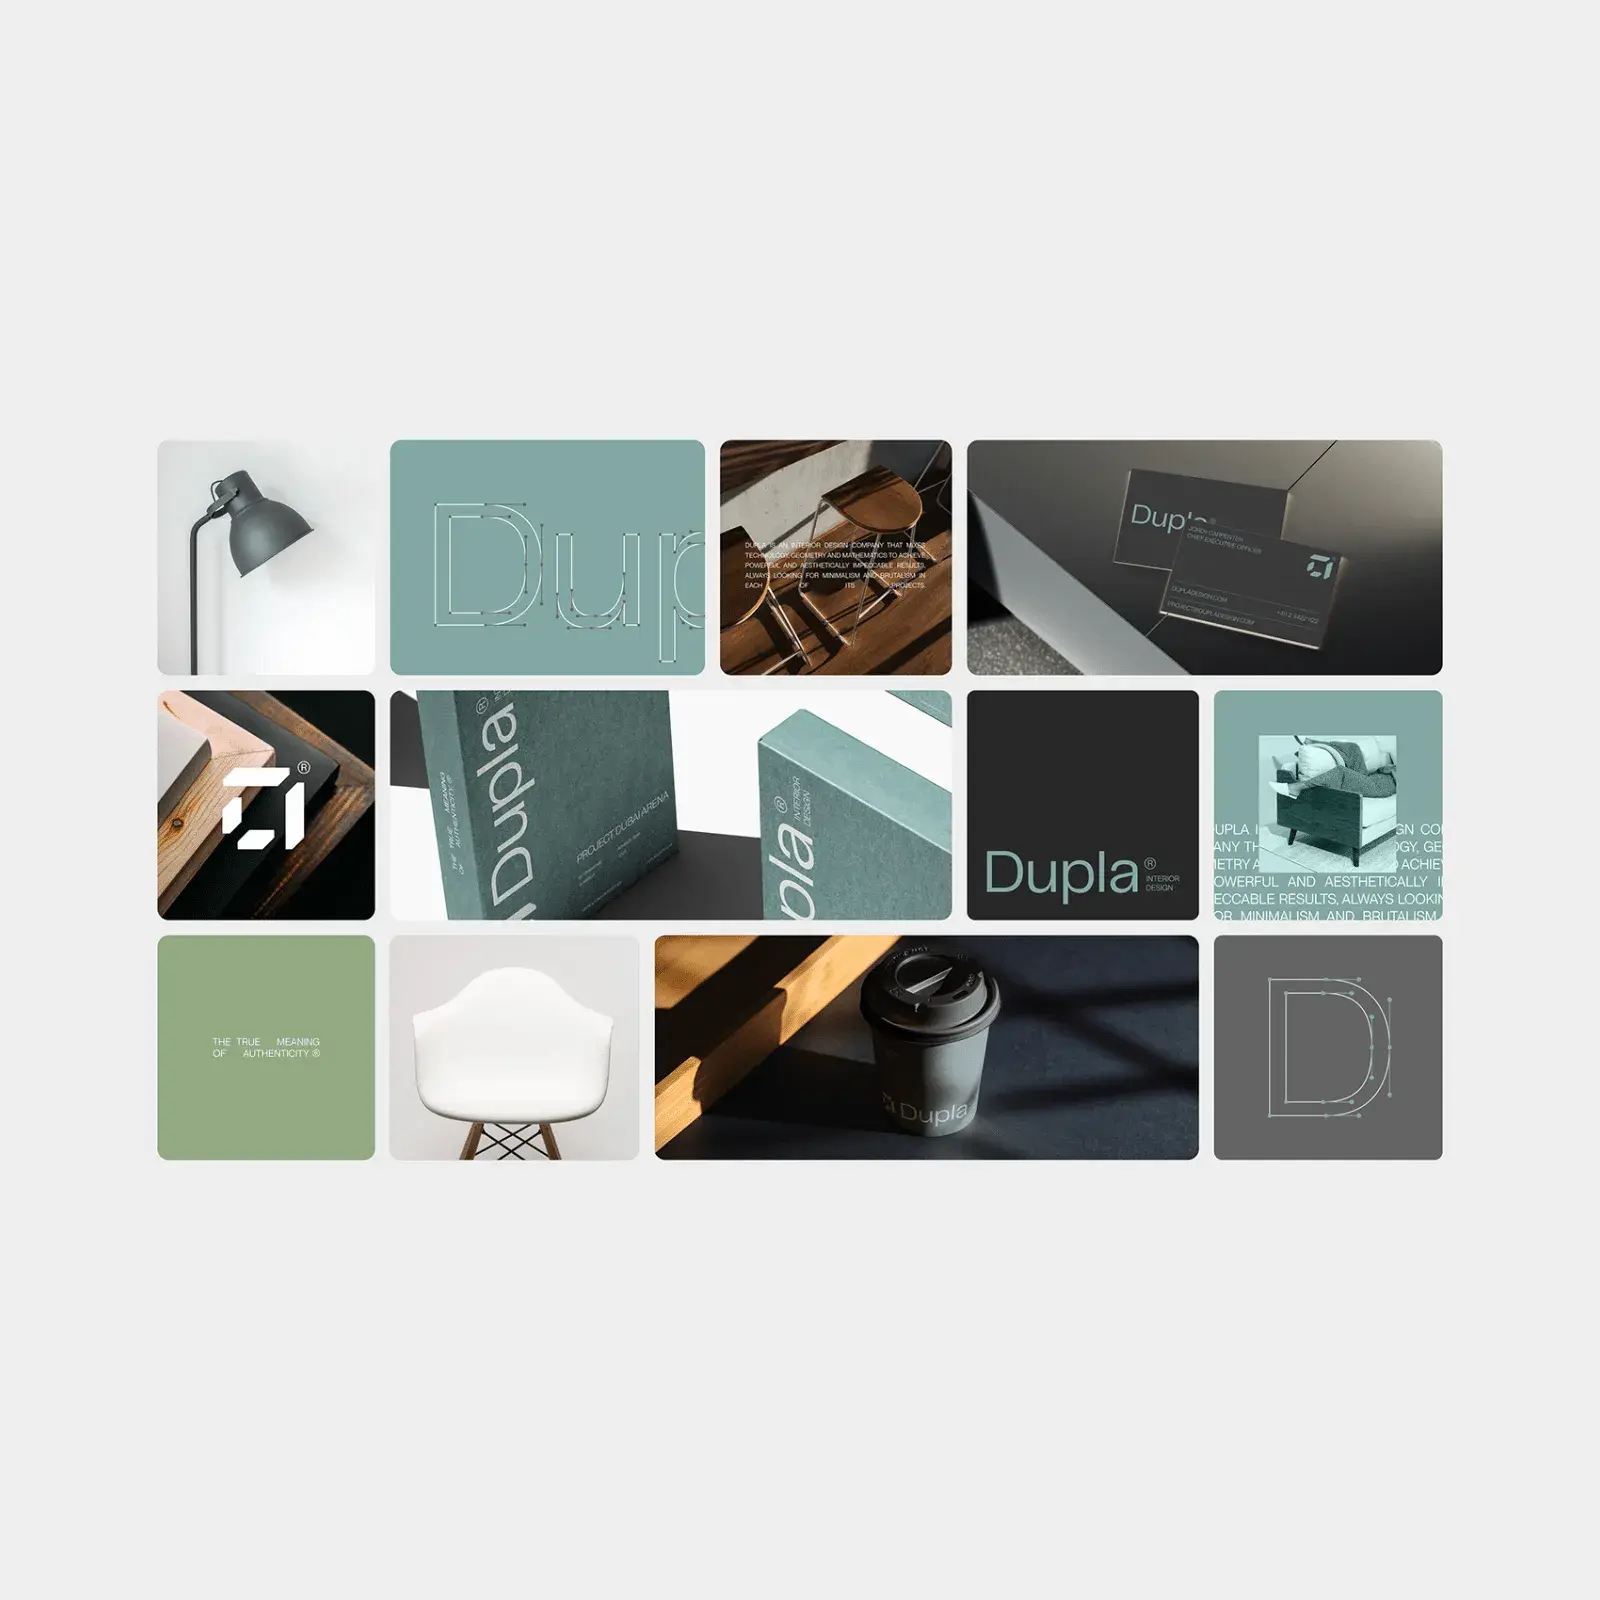 Dupla’s Minimalist and Brutalist Branding and Visual Identity